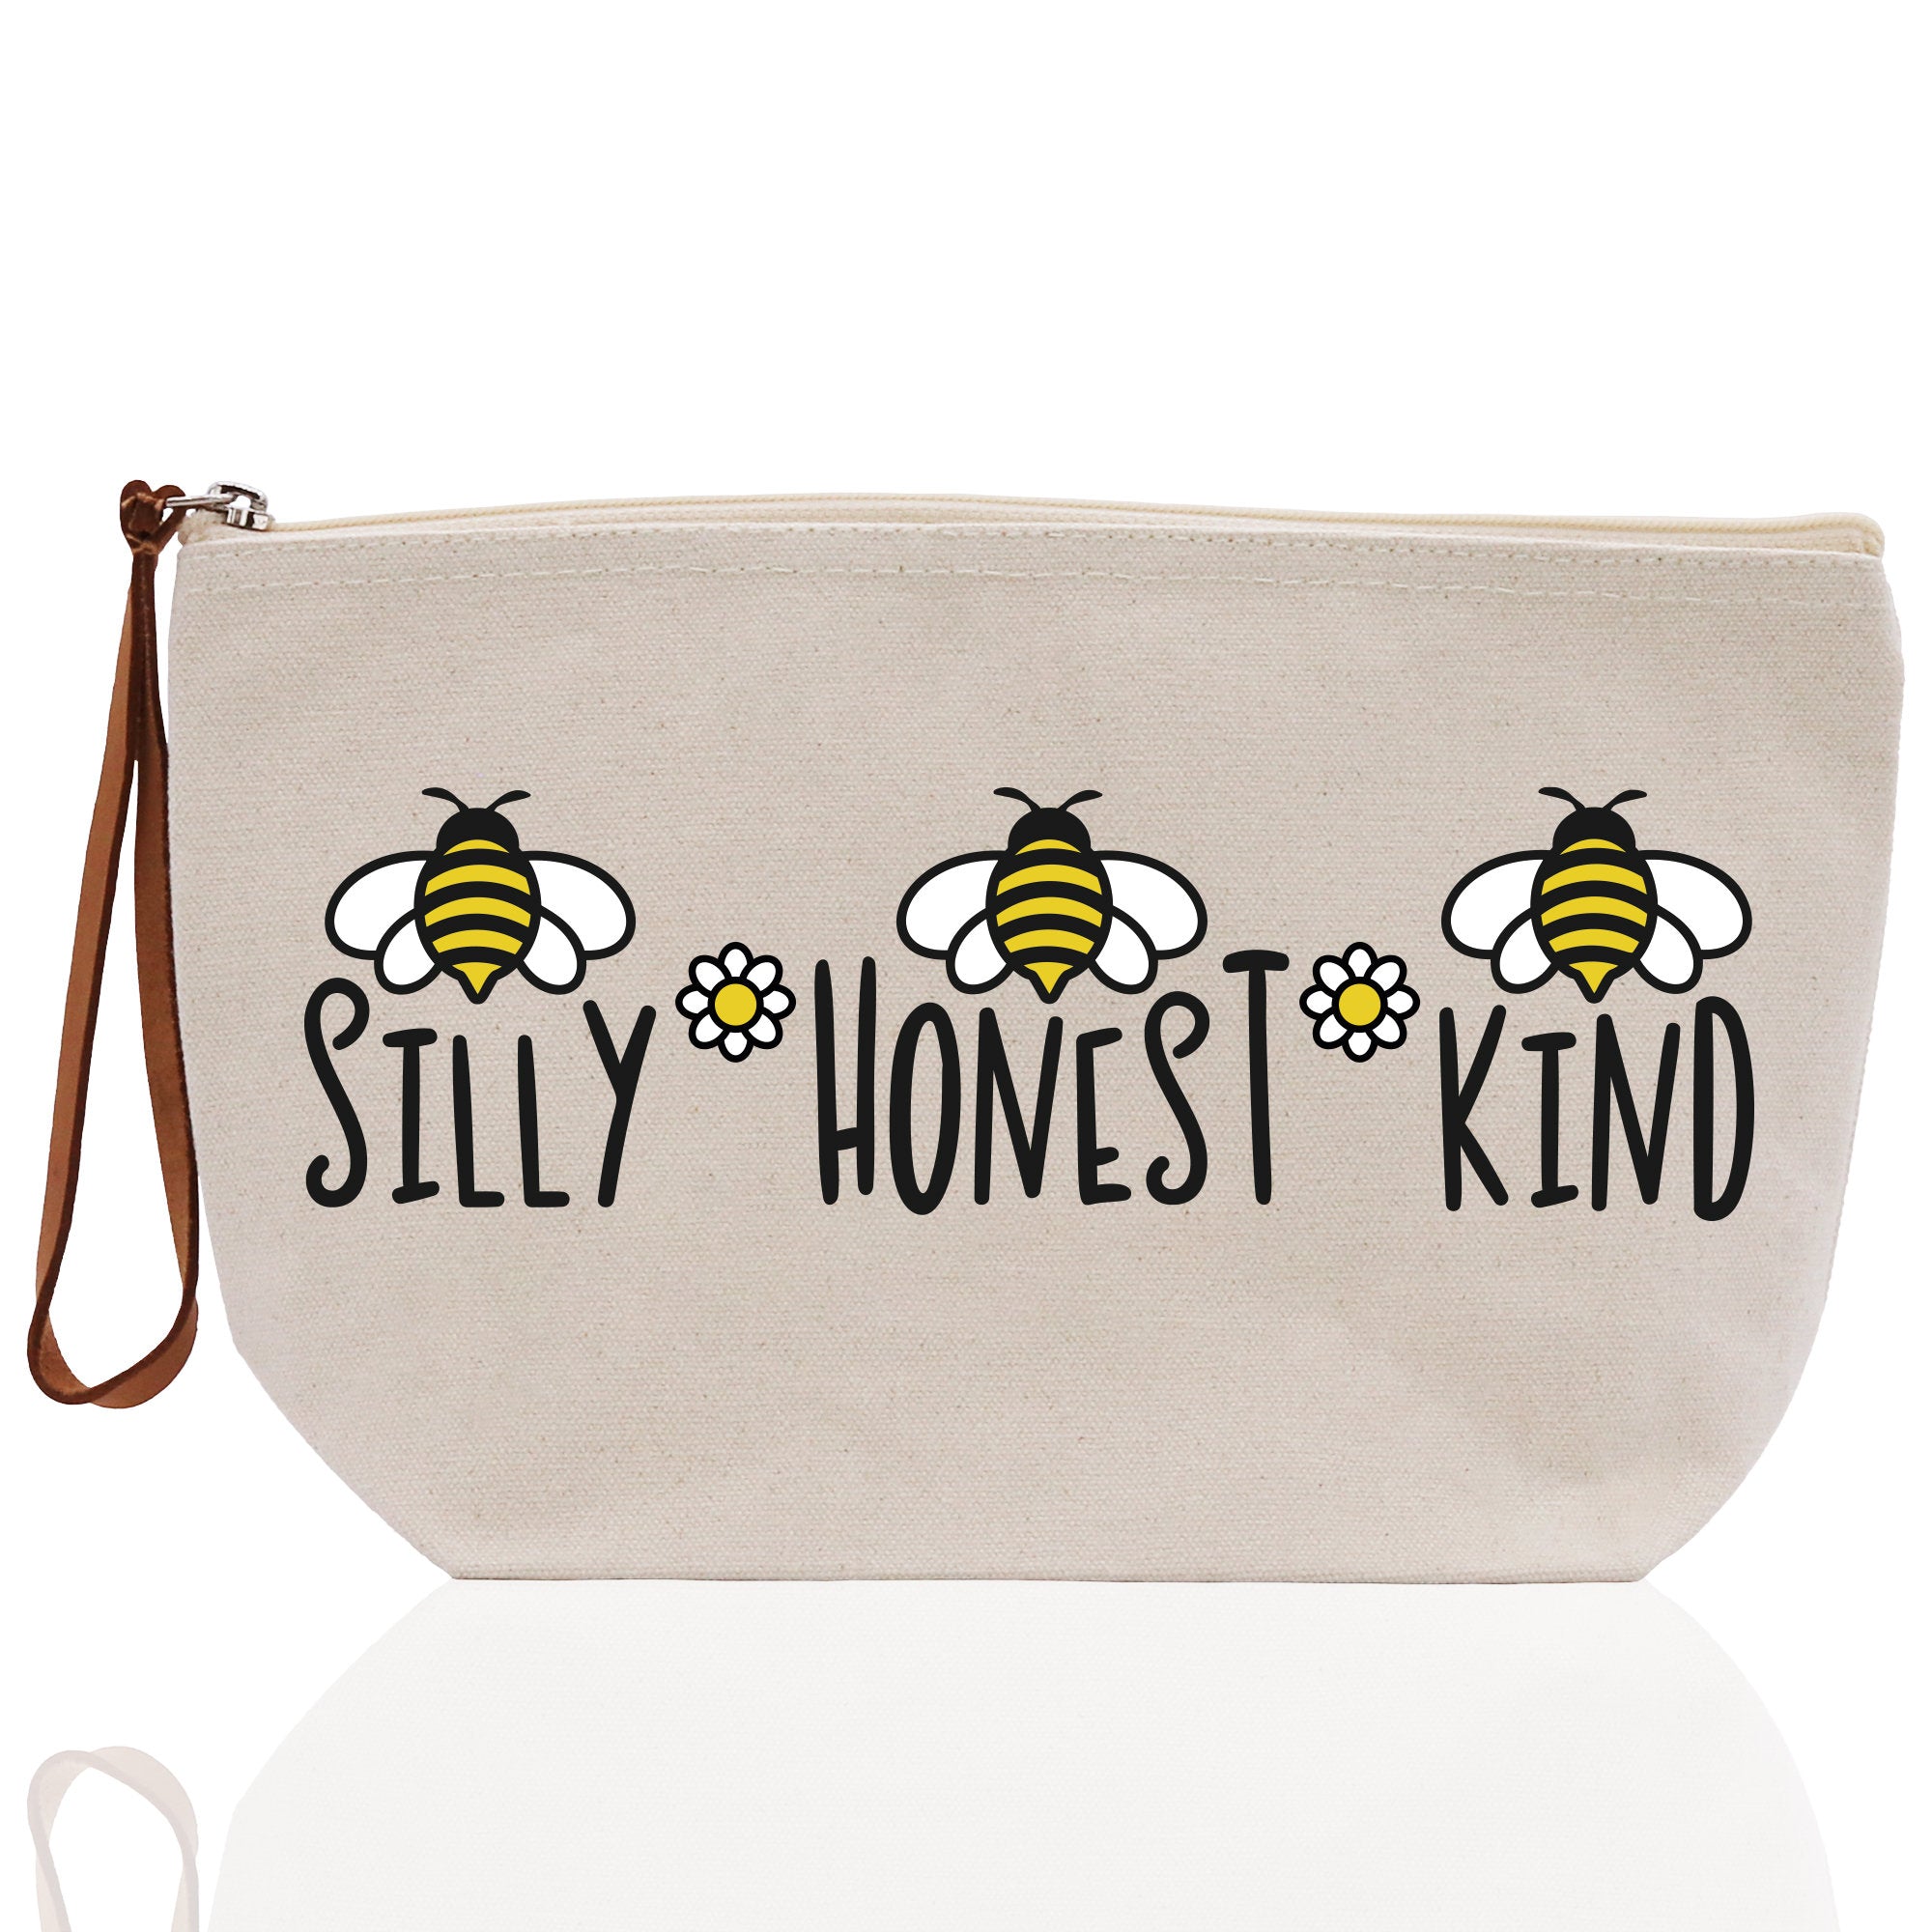 Silly Honest Kind Zipper Cotton Canvas Zipper Pouch Bag Bee Makeup Case Custom Zipper Pouch Tote Toiletry Bag Gift for Her Birthday Gift